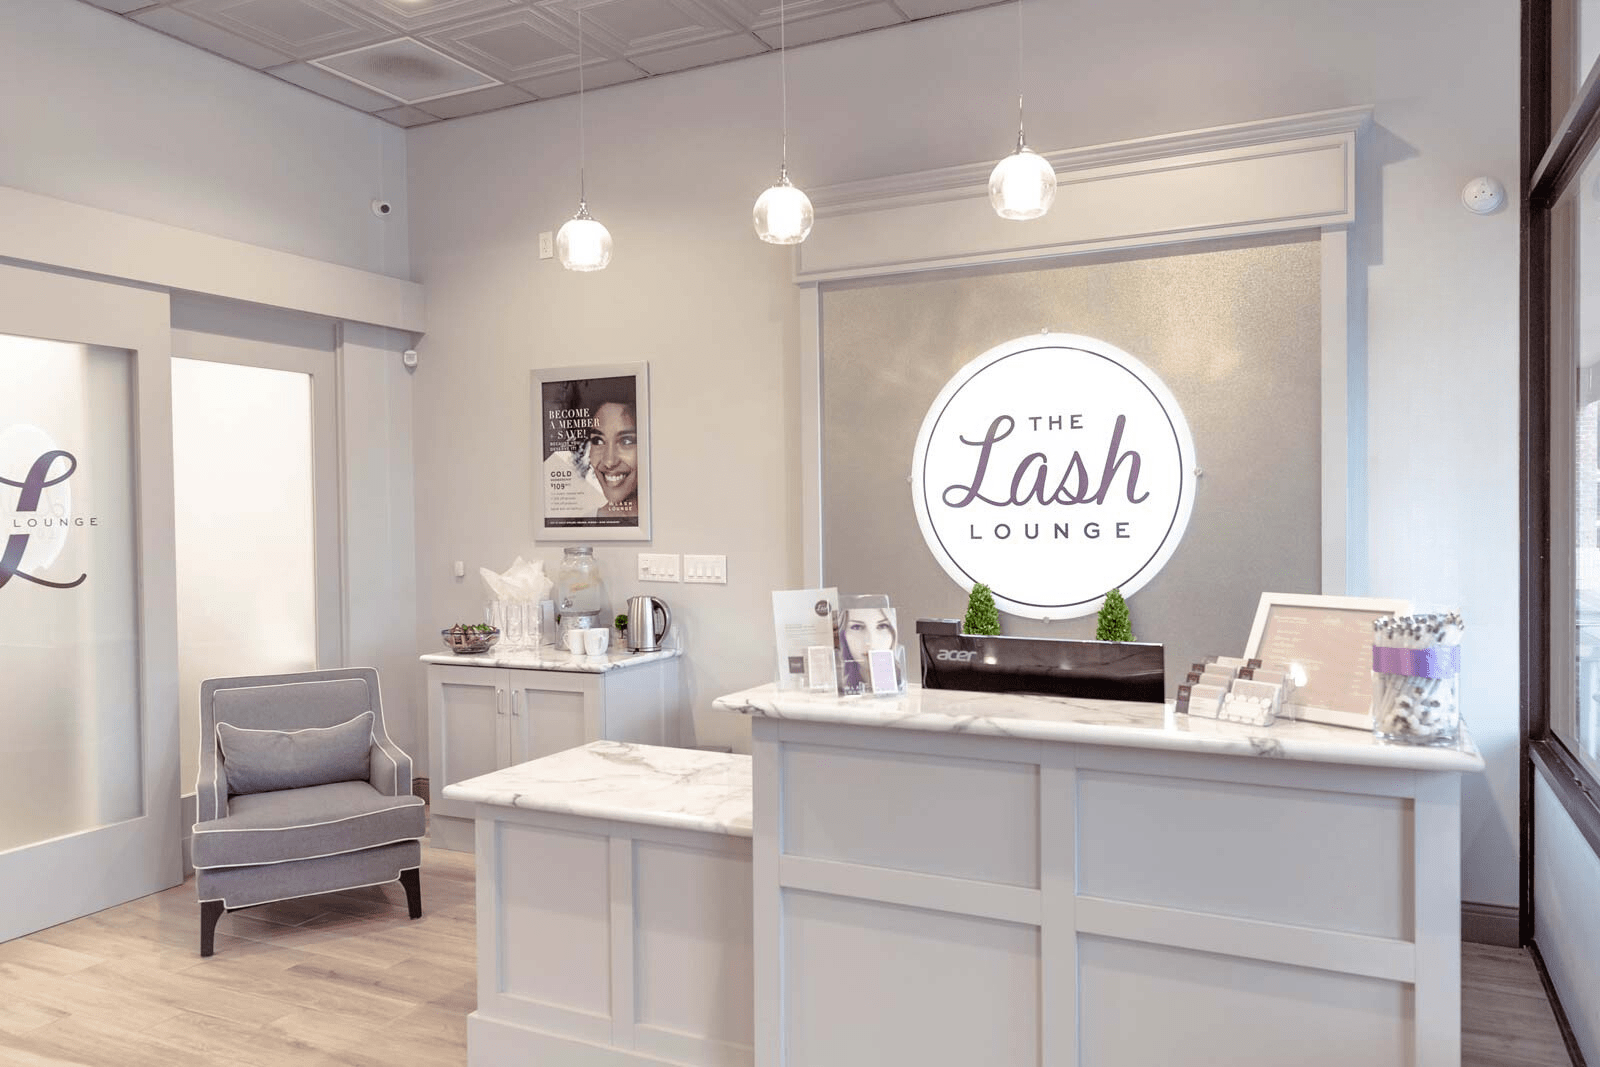 The interior of The Lash Lounge franchise.